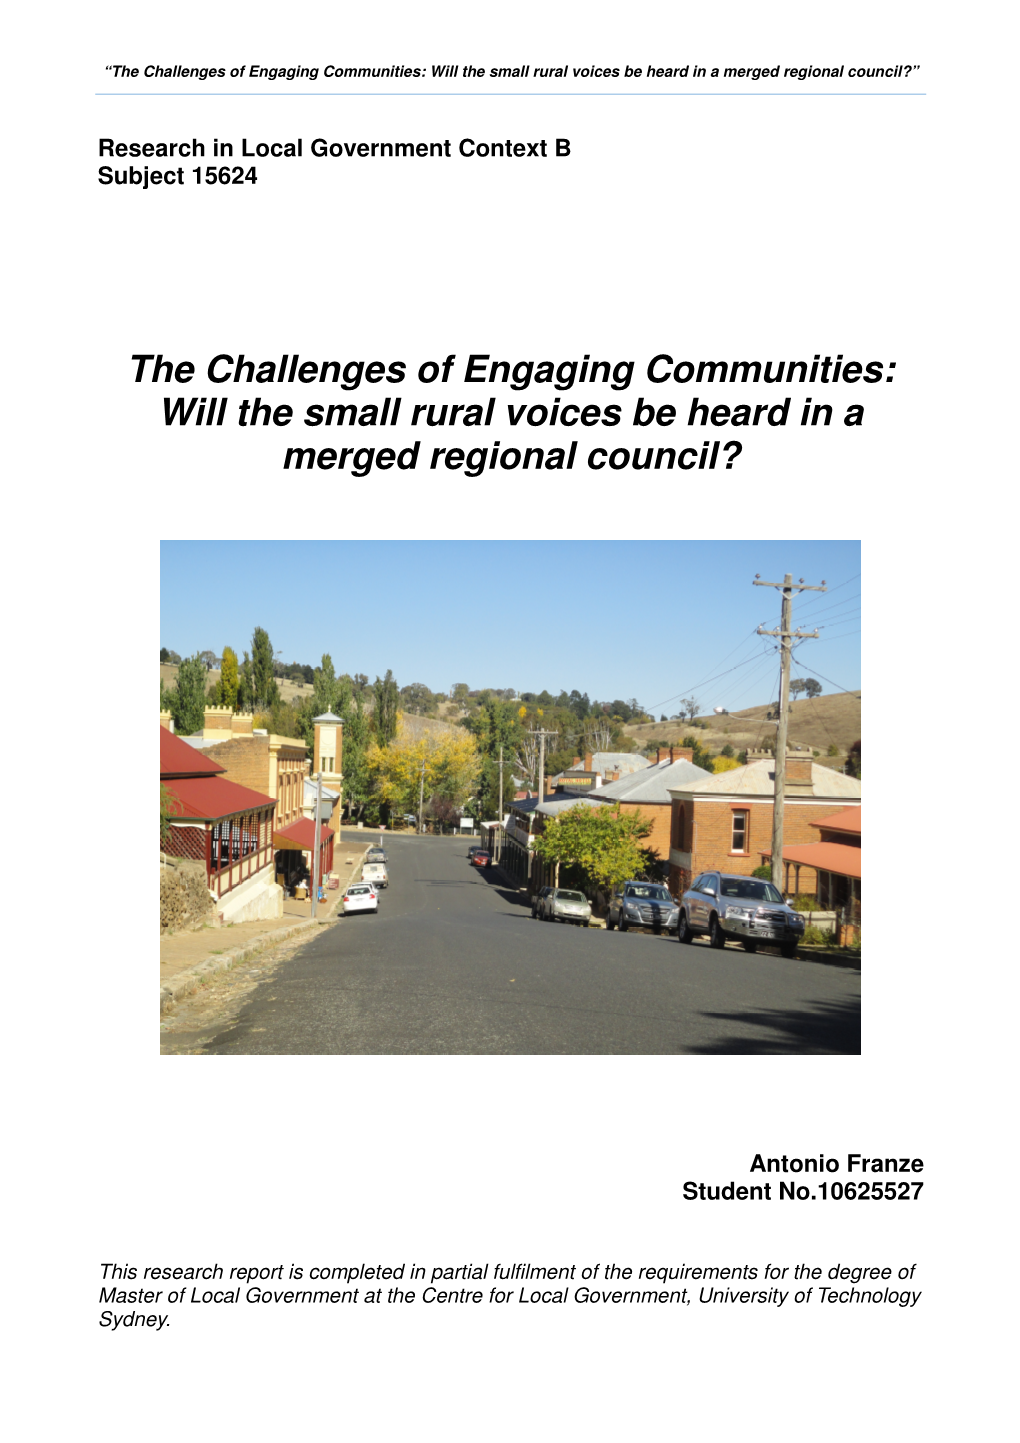 Will the Small Rural Voices Be Heard in a Merged Regional Council?”